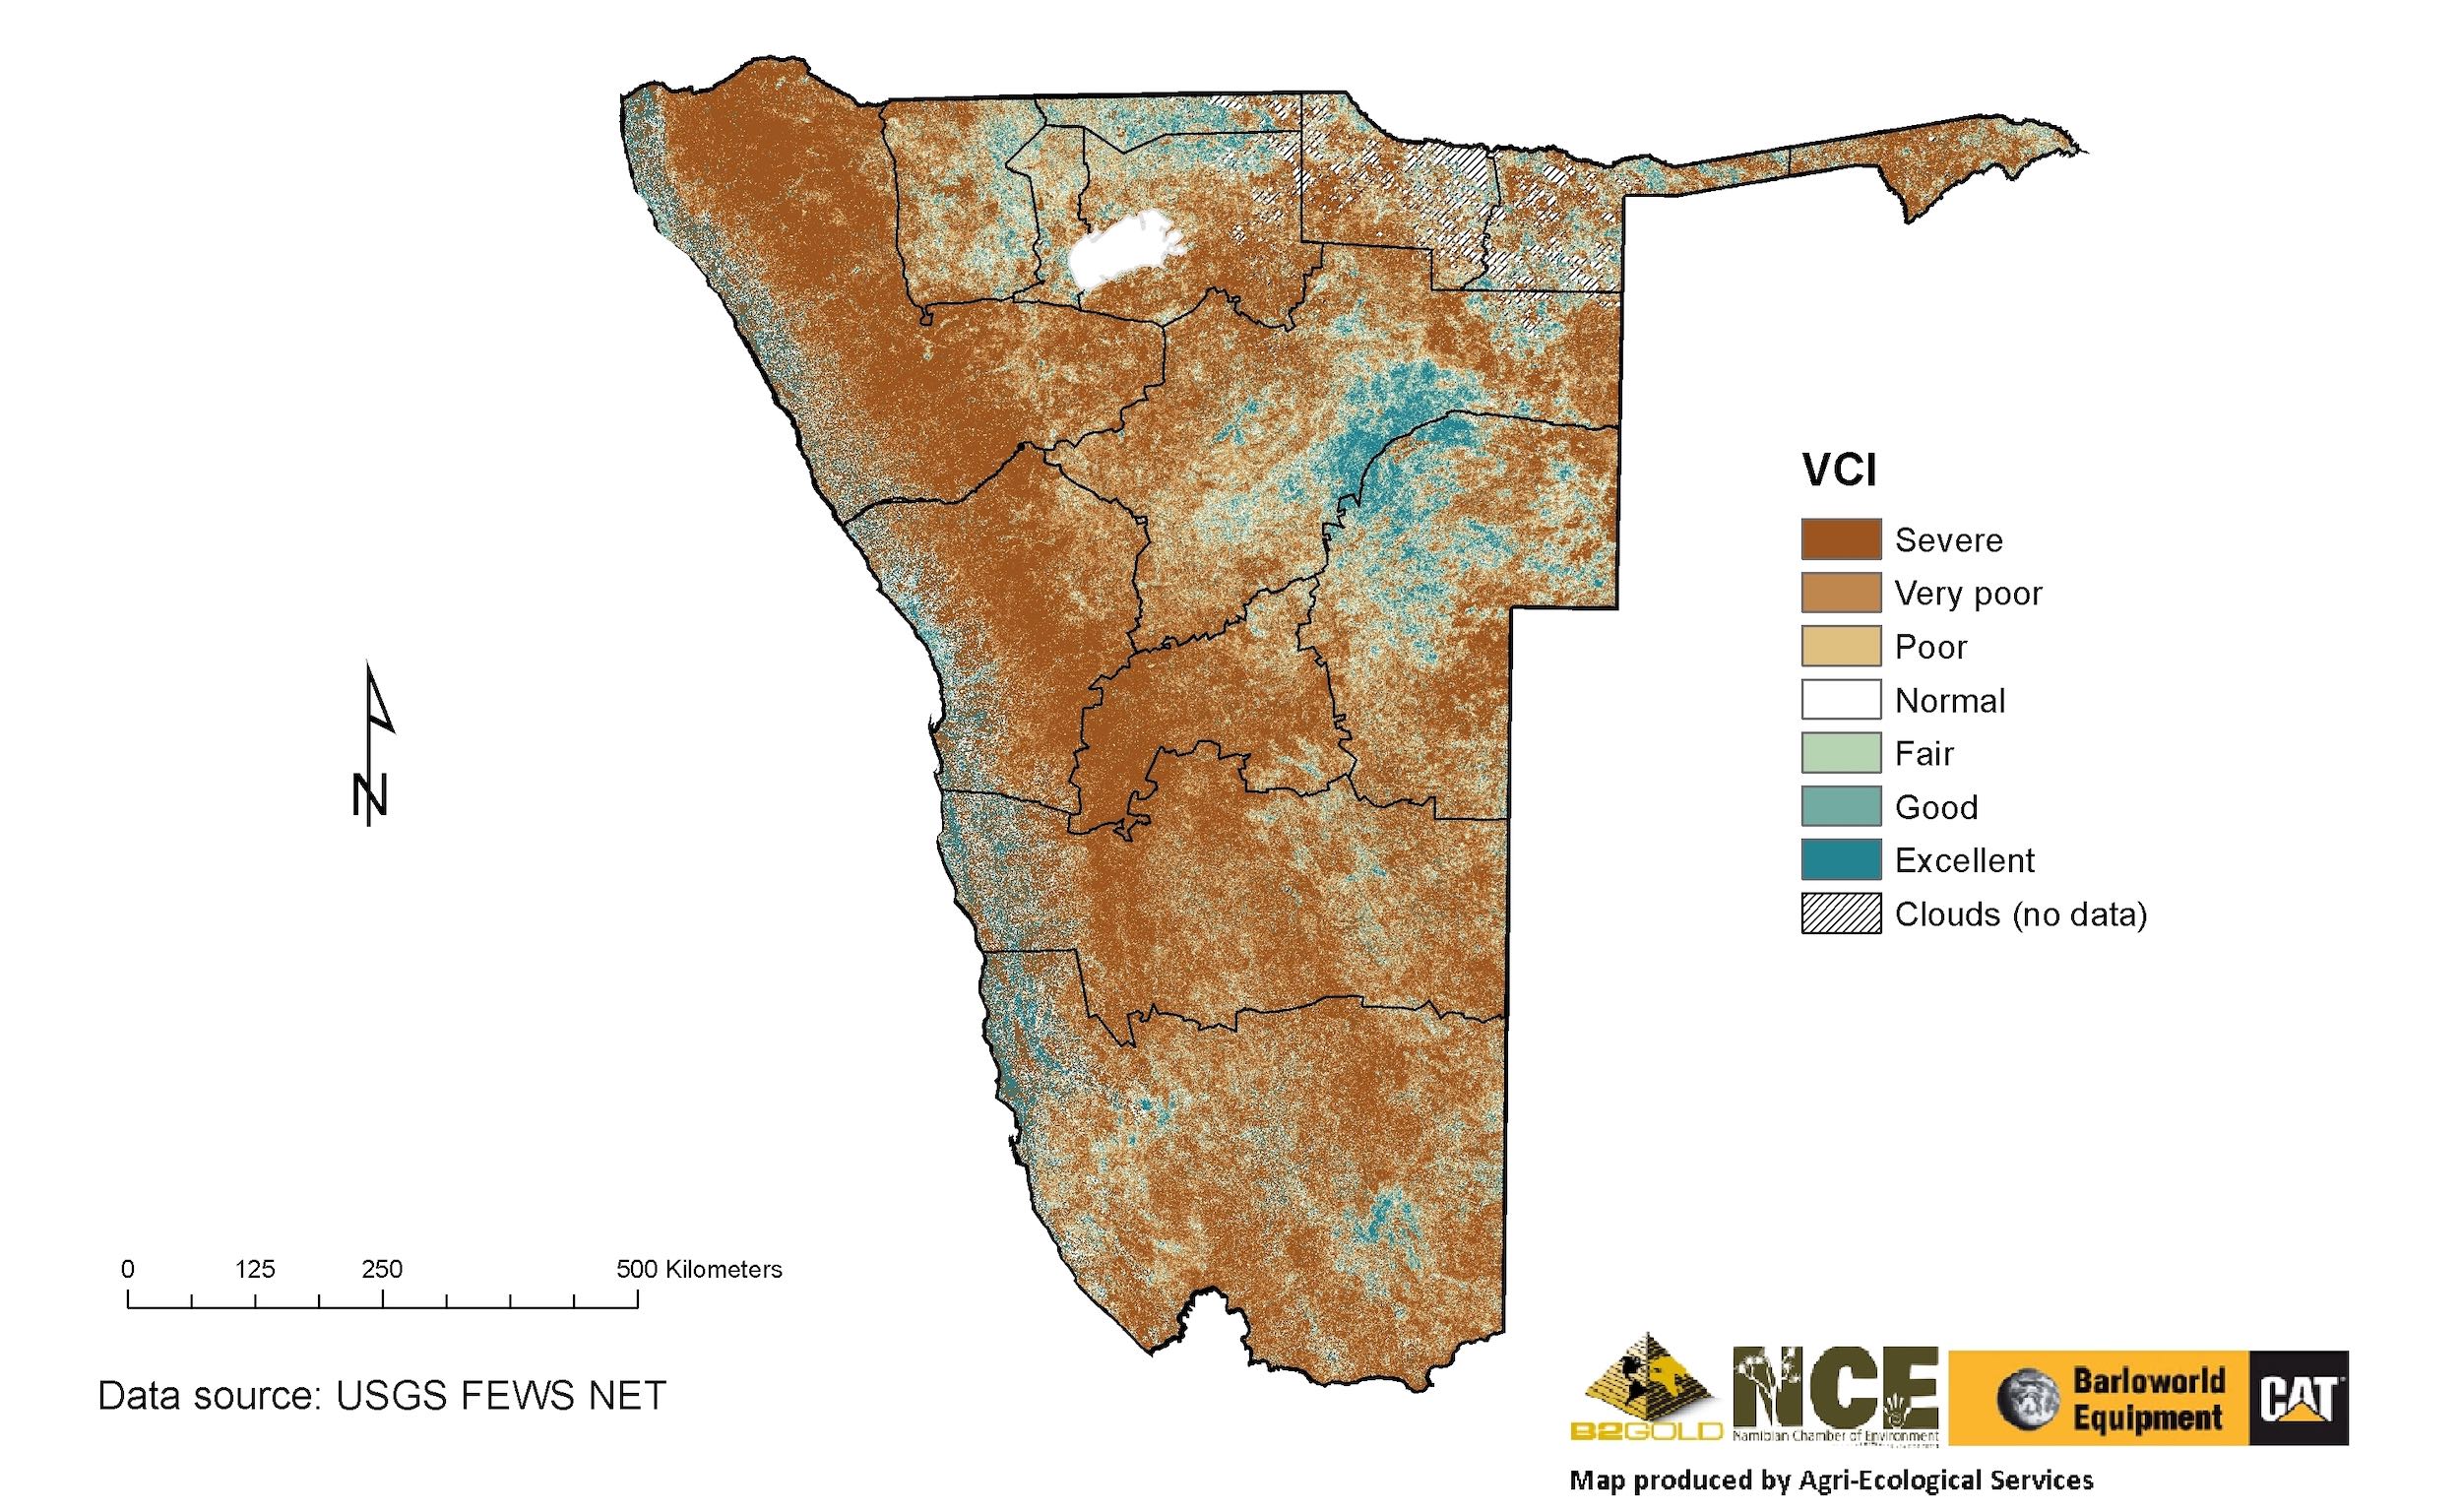 A map of the whole of Namibia showing that most of the country is in severe drought.